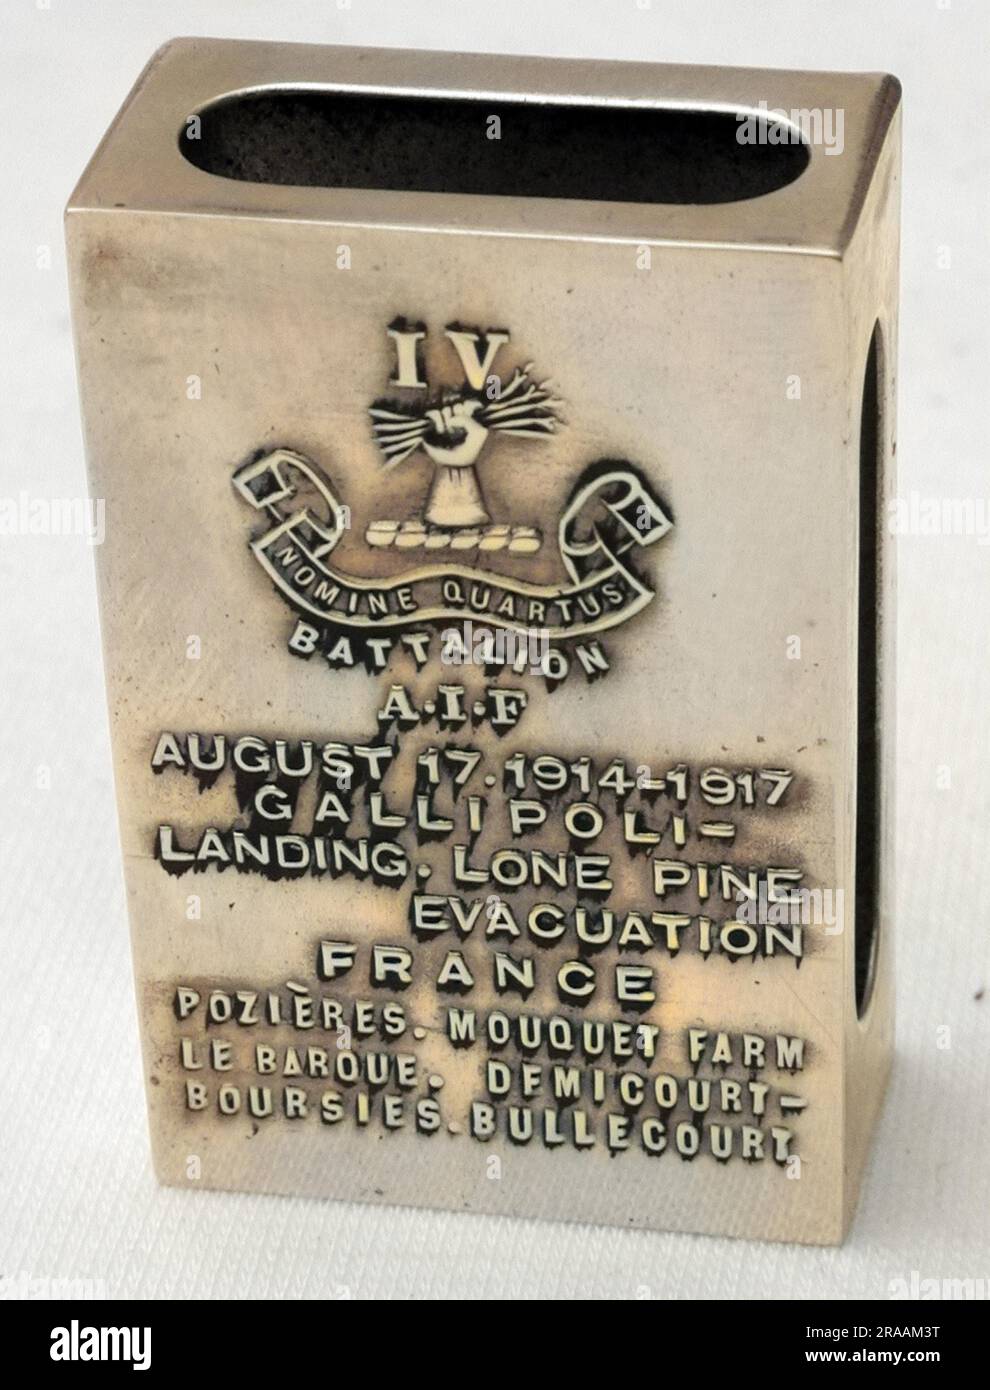 Matchbox holder - made in Birmingham - with the Australian Imperial Force cap badge impressed upon it.  On reverse, commemorating the Battle Honours of the 4th Battalion AIF, dated August 17 1914-1917.  Gallipoli - Lone Pine, France - Pozieres, Mouquet Farm, Le Barque, Demicourt-Boursies, Bullecourt. Trench Art. Stock Photo